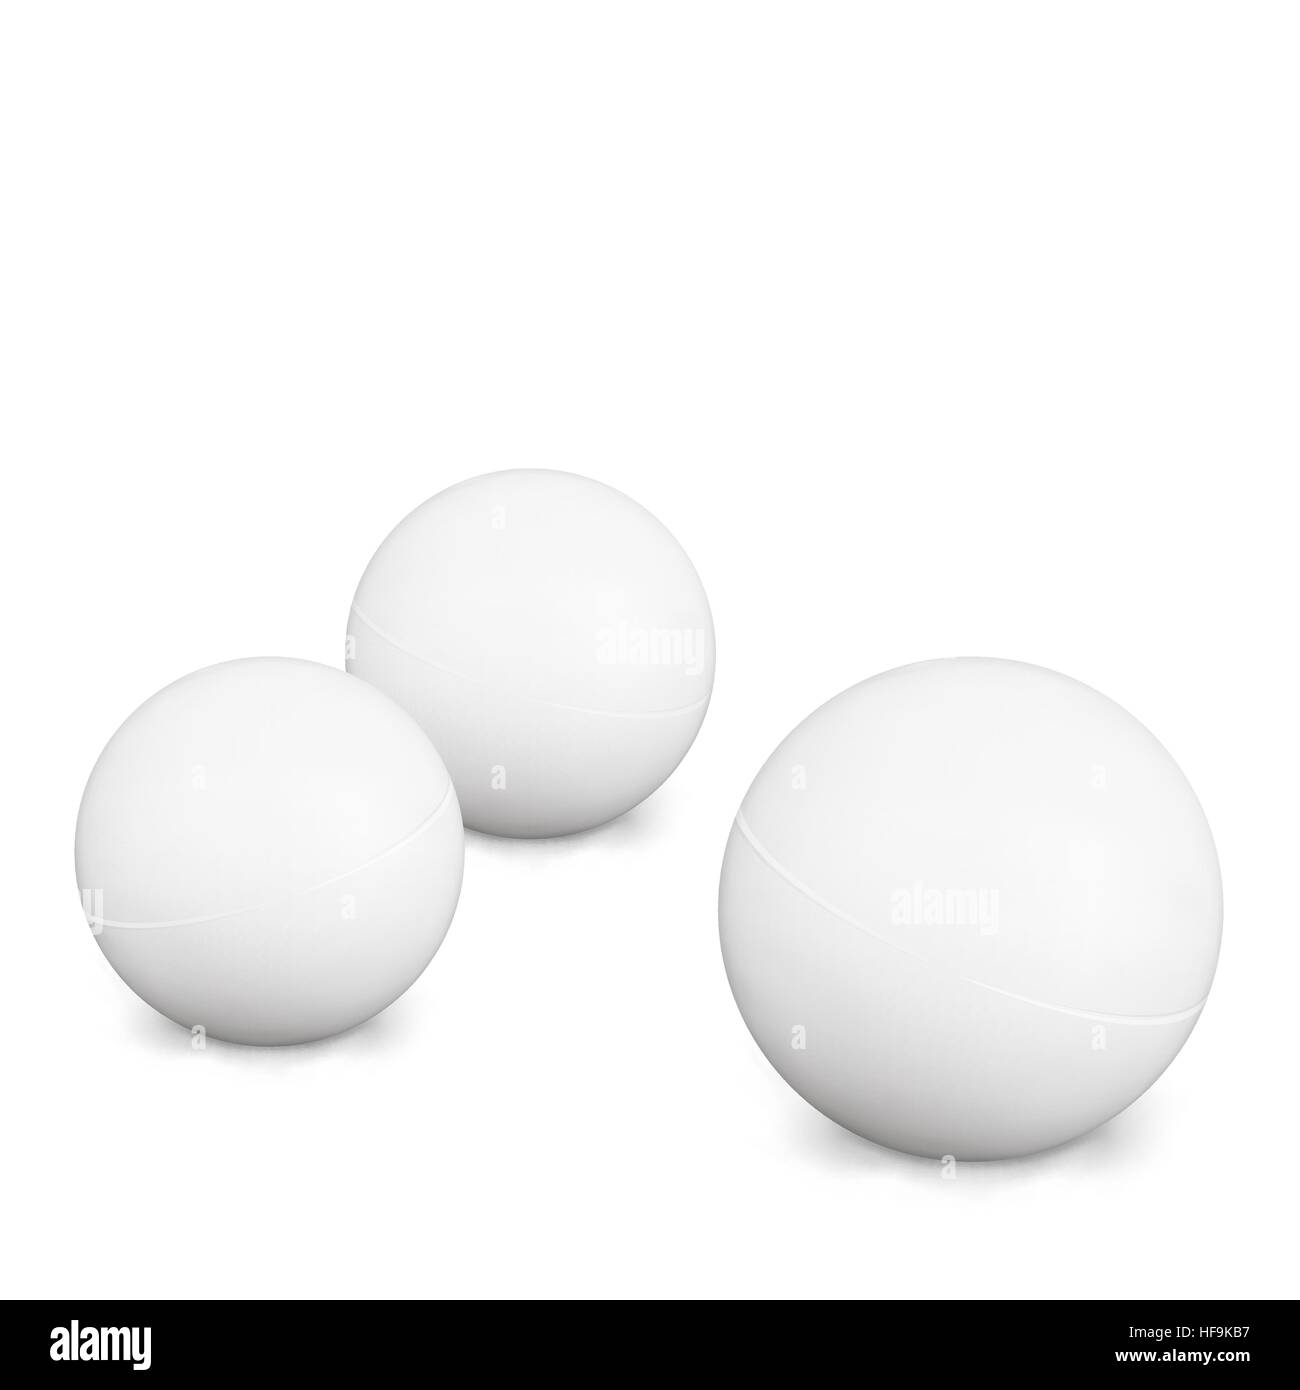 Ping Pong Balls. White Photo Realistic 3d Balls With Shadow. Isolated On White Background. Stock Vector